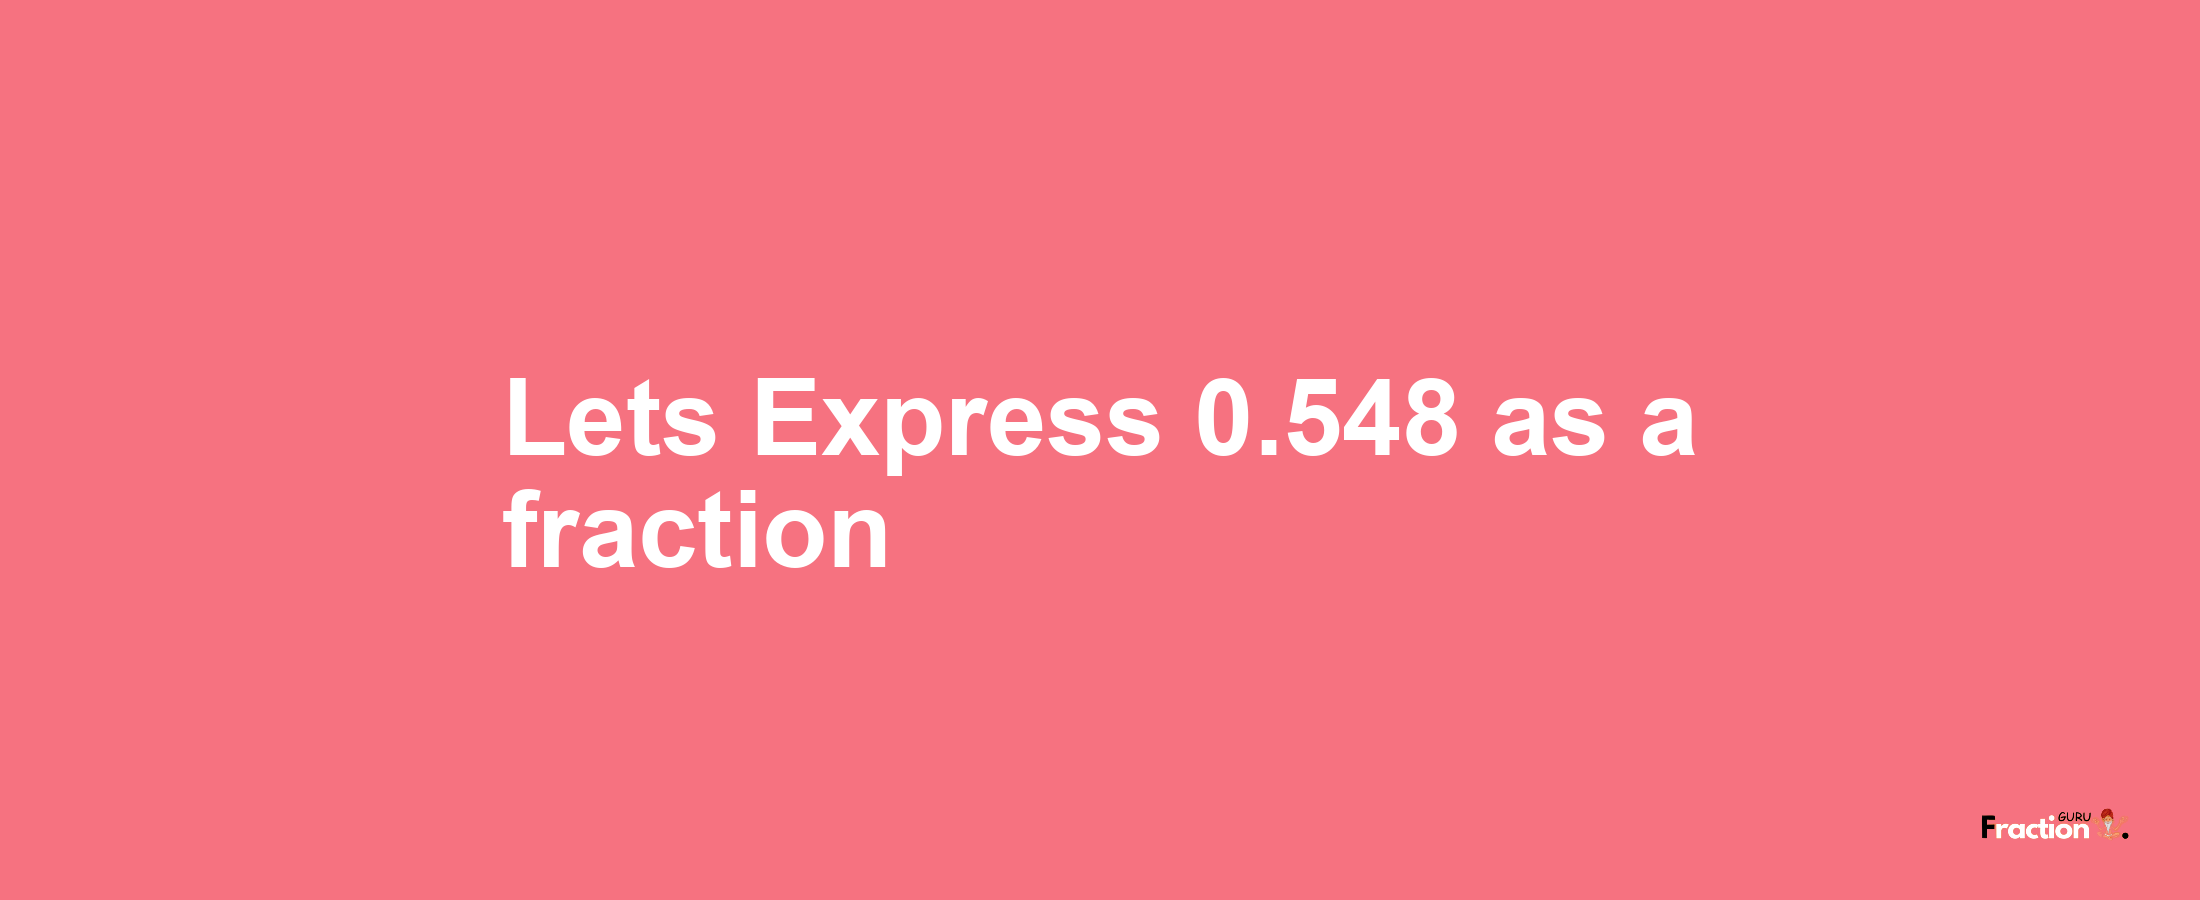 Lets Express 0.548 as afraction